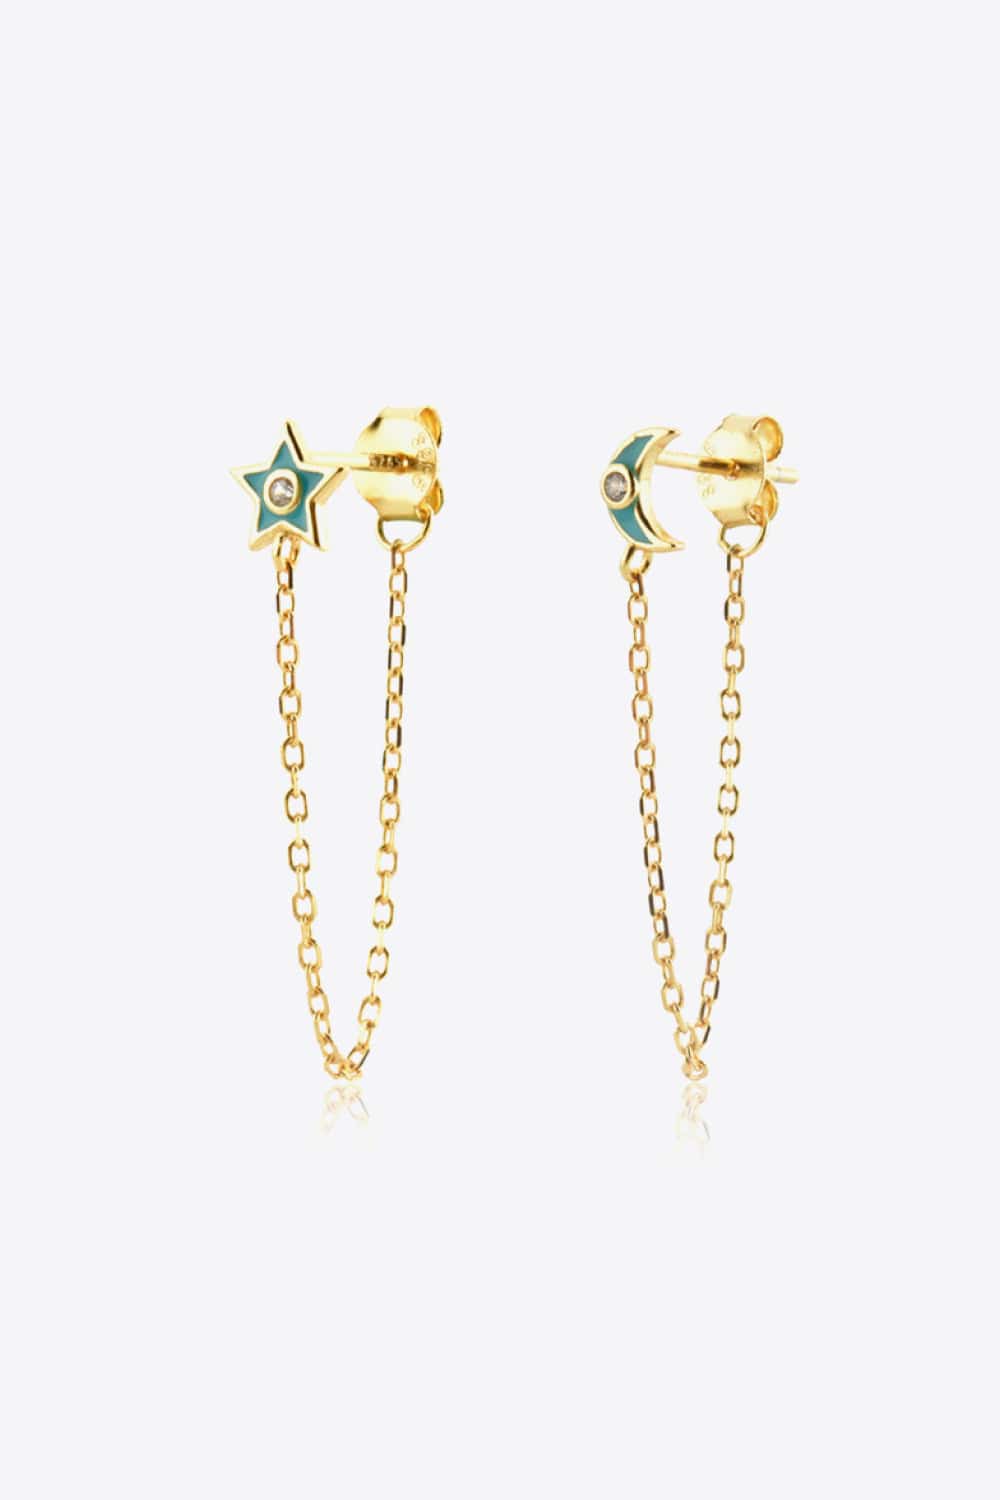 Zircon Star and Moon Mismatched Earrings - Guy Christopher 